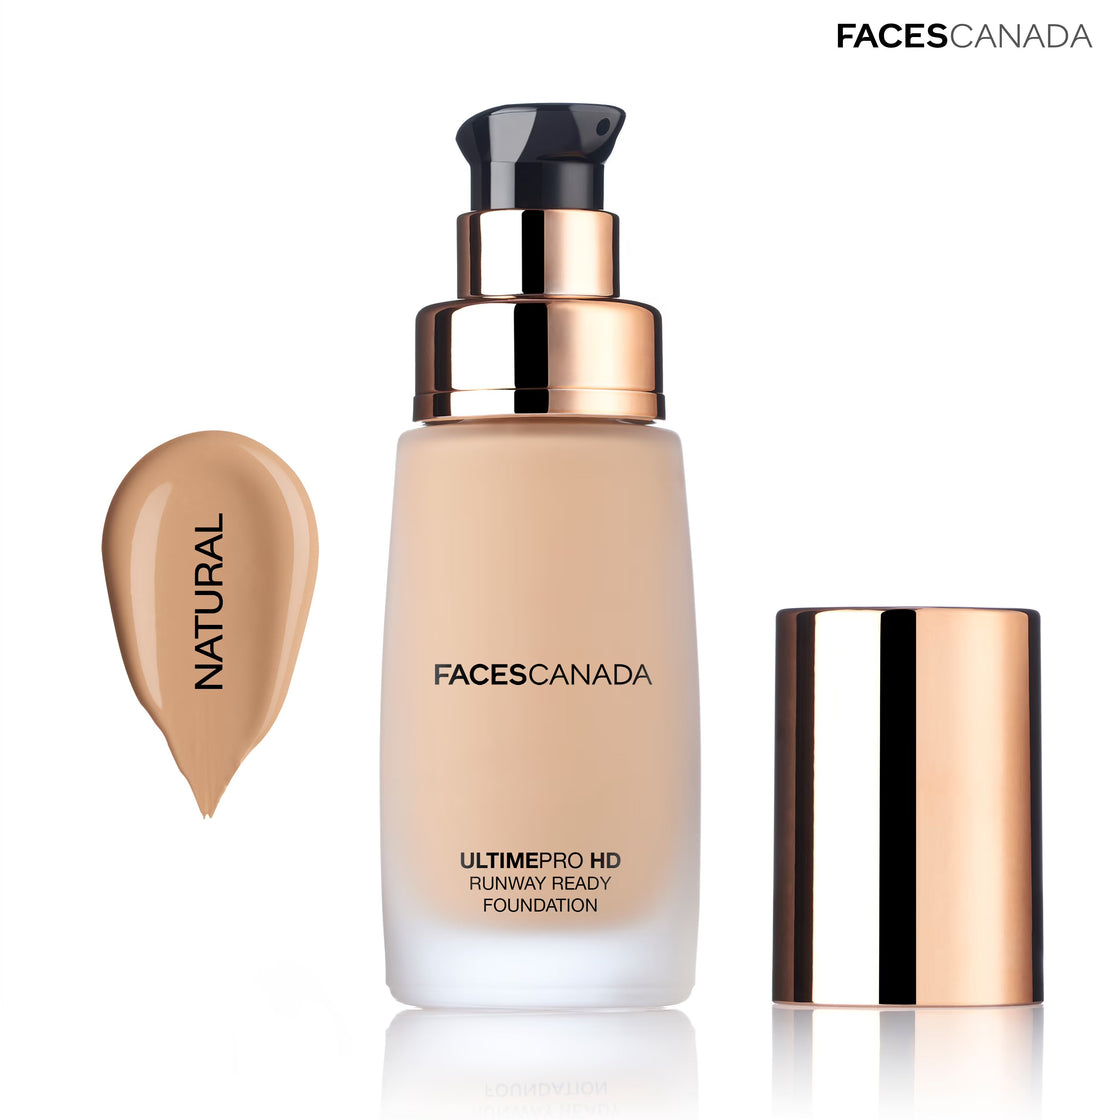 Faces Canada Ultime Pro Hd Runway Ready Foundation -30Ml-6